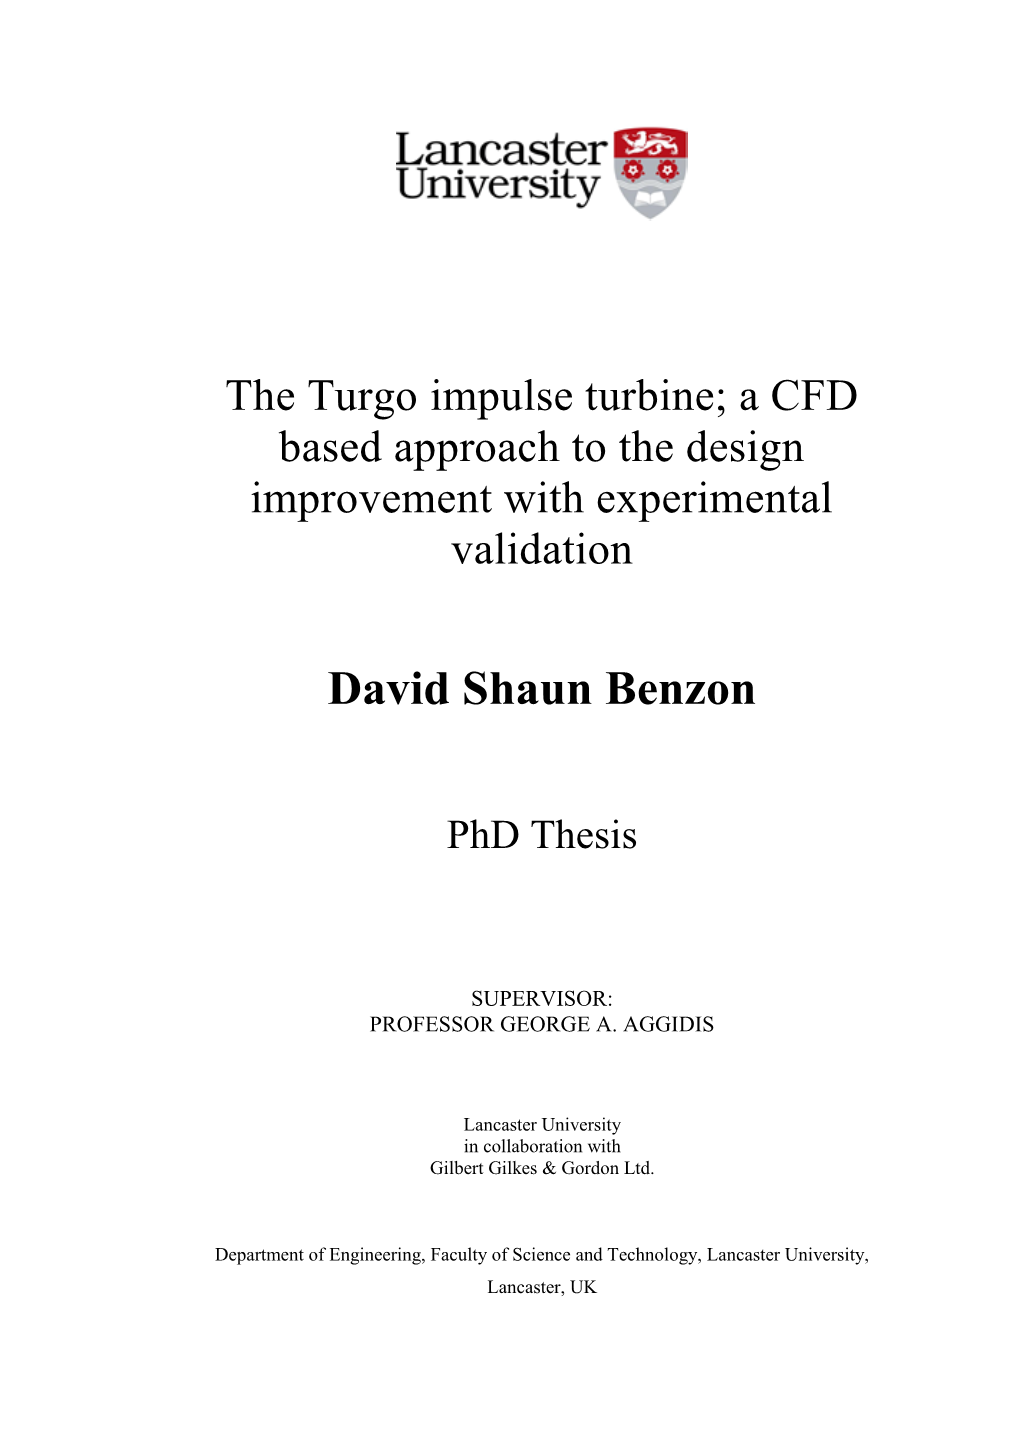 The Turgo Impulse Turbine; a CFD Based Approach to the Design Improvement with Experimental Validation